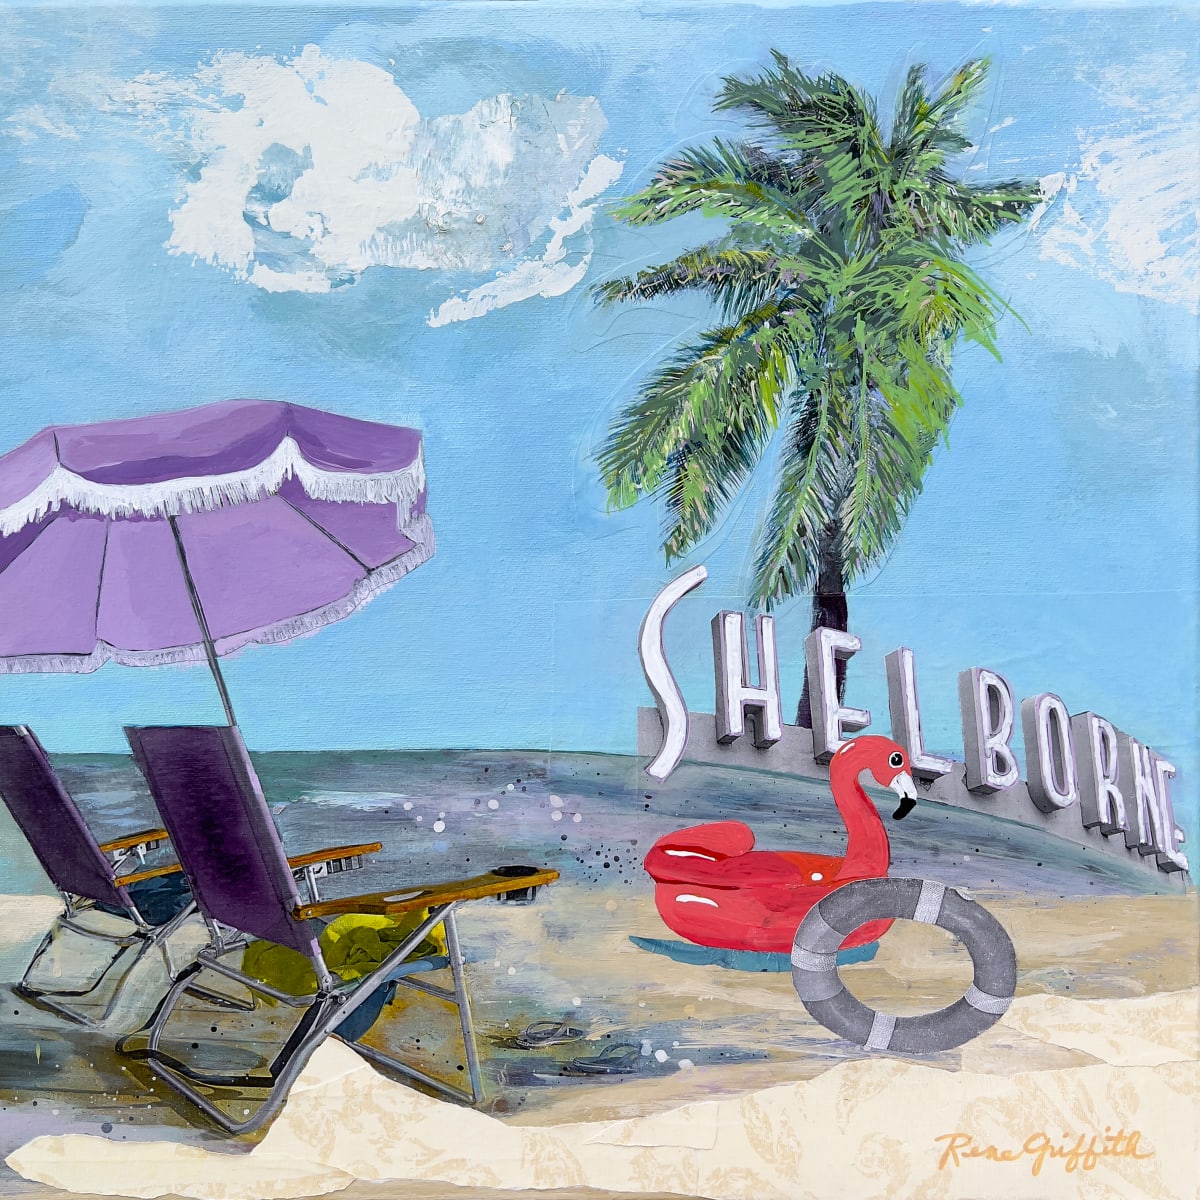 A Flip Flop Kinda Day by Rene Griffith 